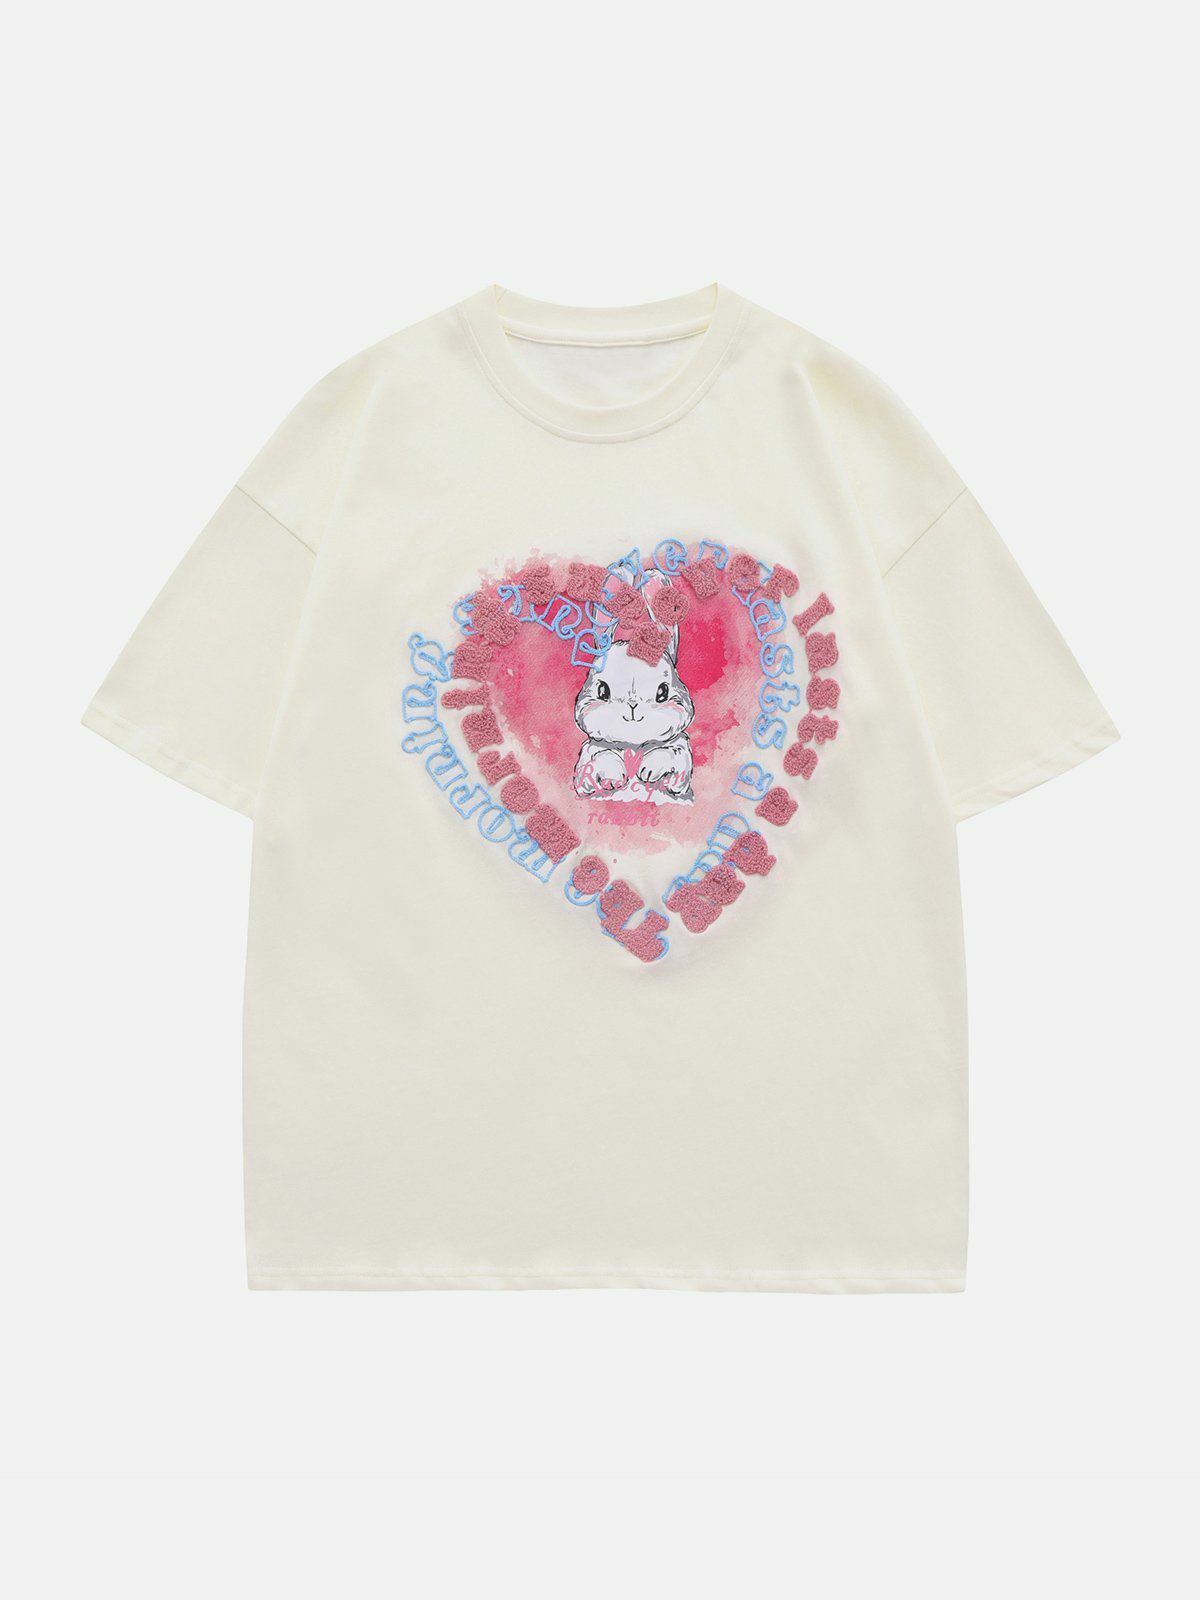 embroidered rabbit heart tee quirky & retro streetwear 1206